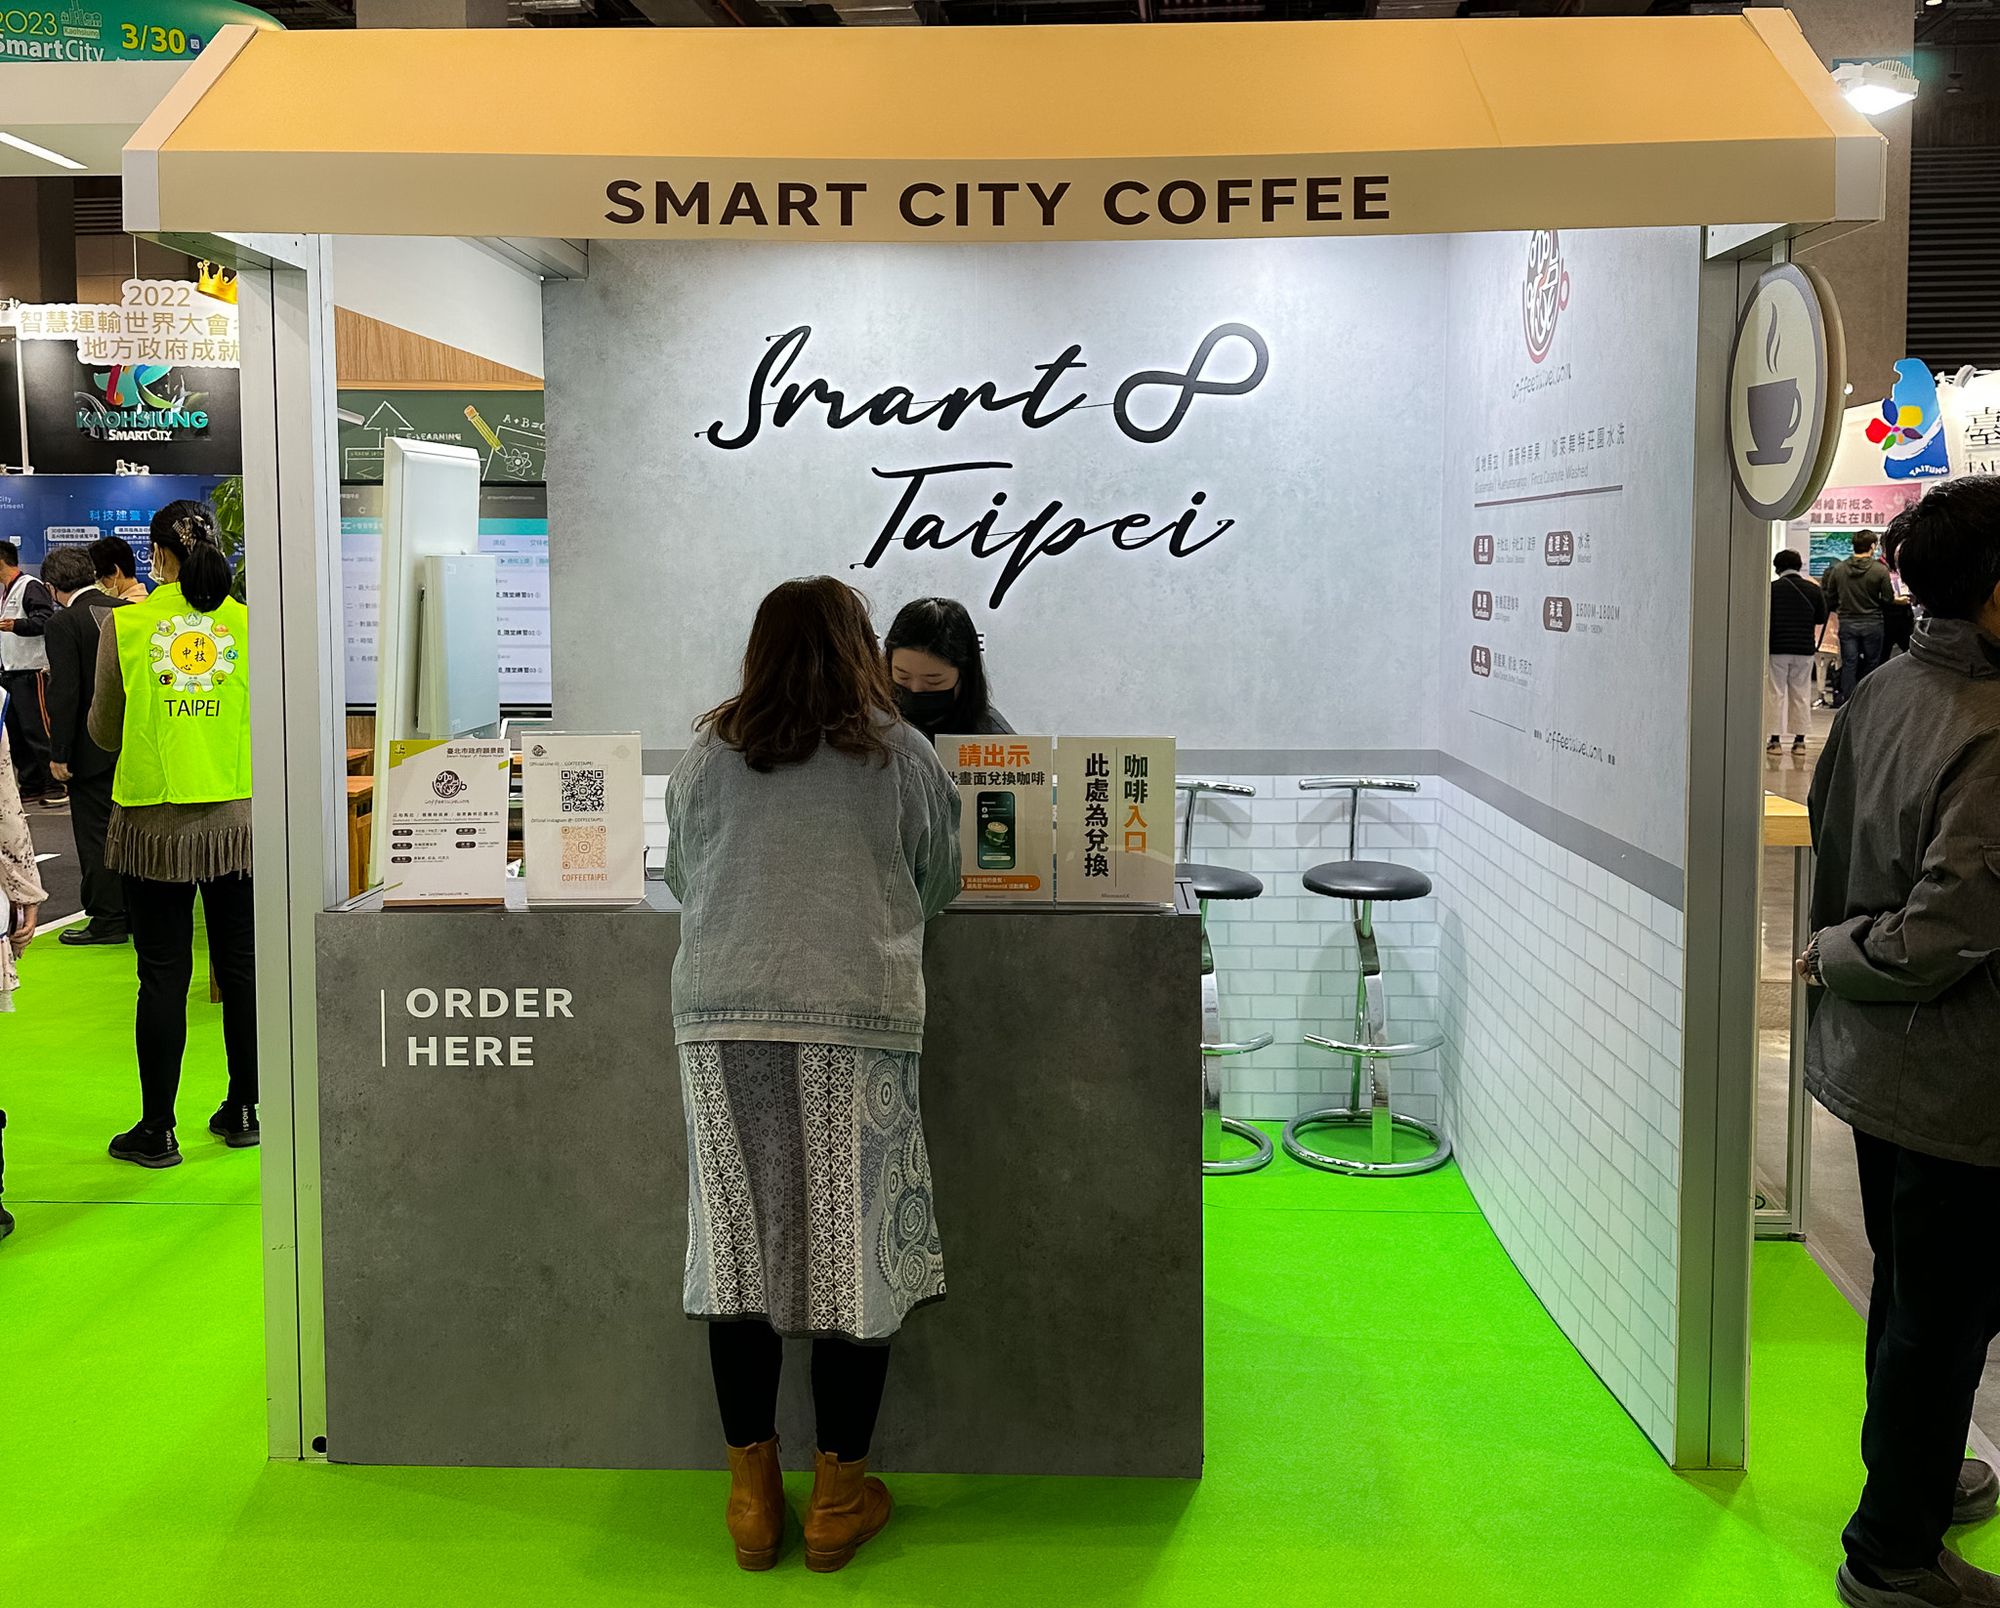 A photo of the Smart City Coffee shop at the expo